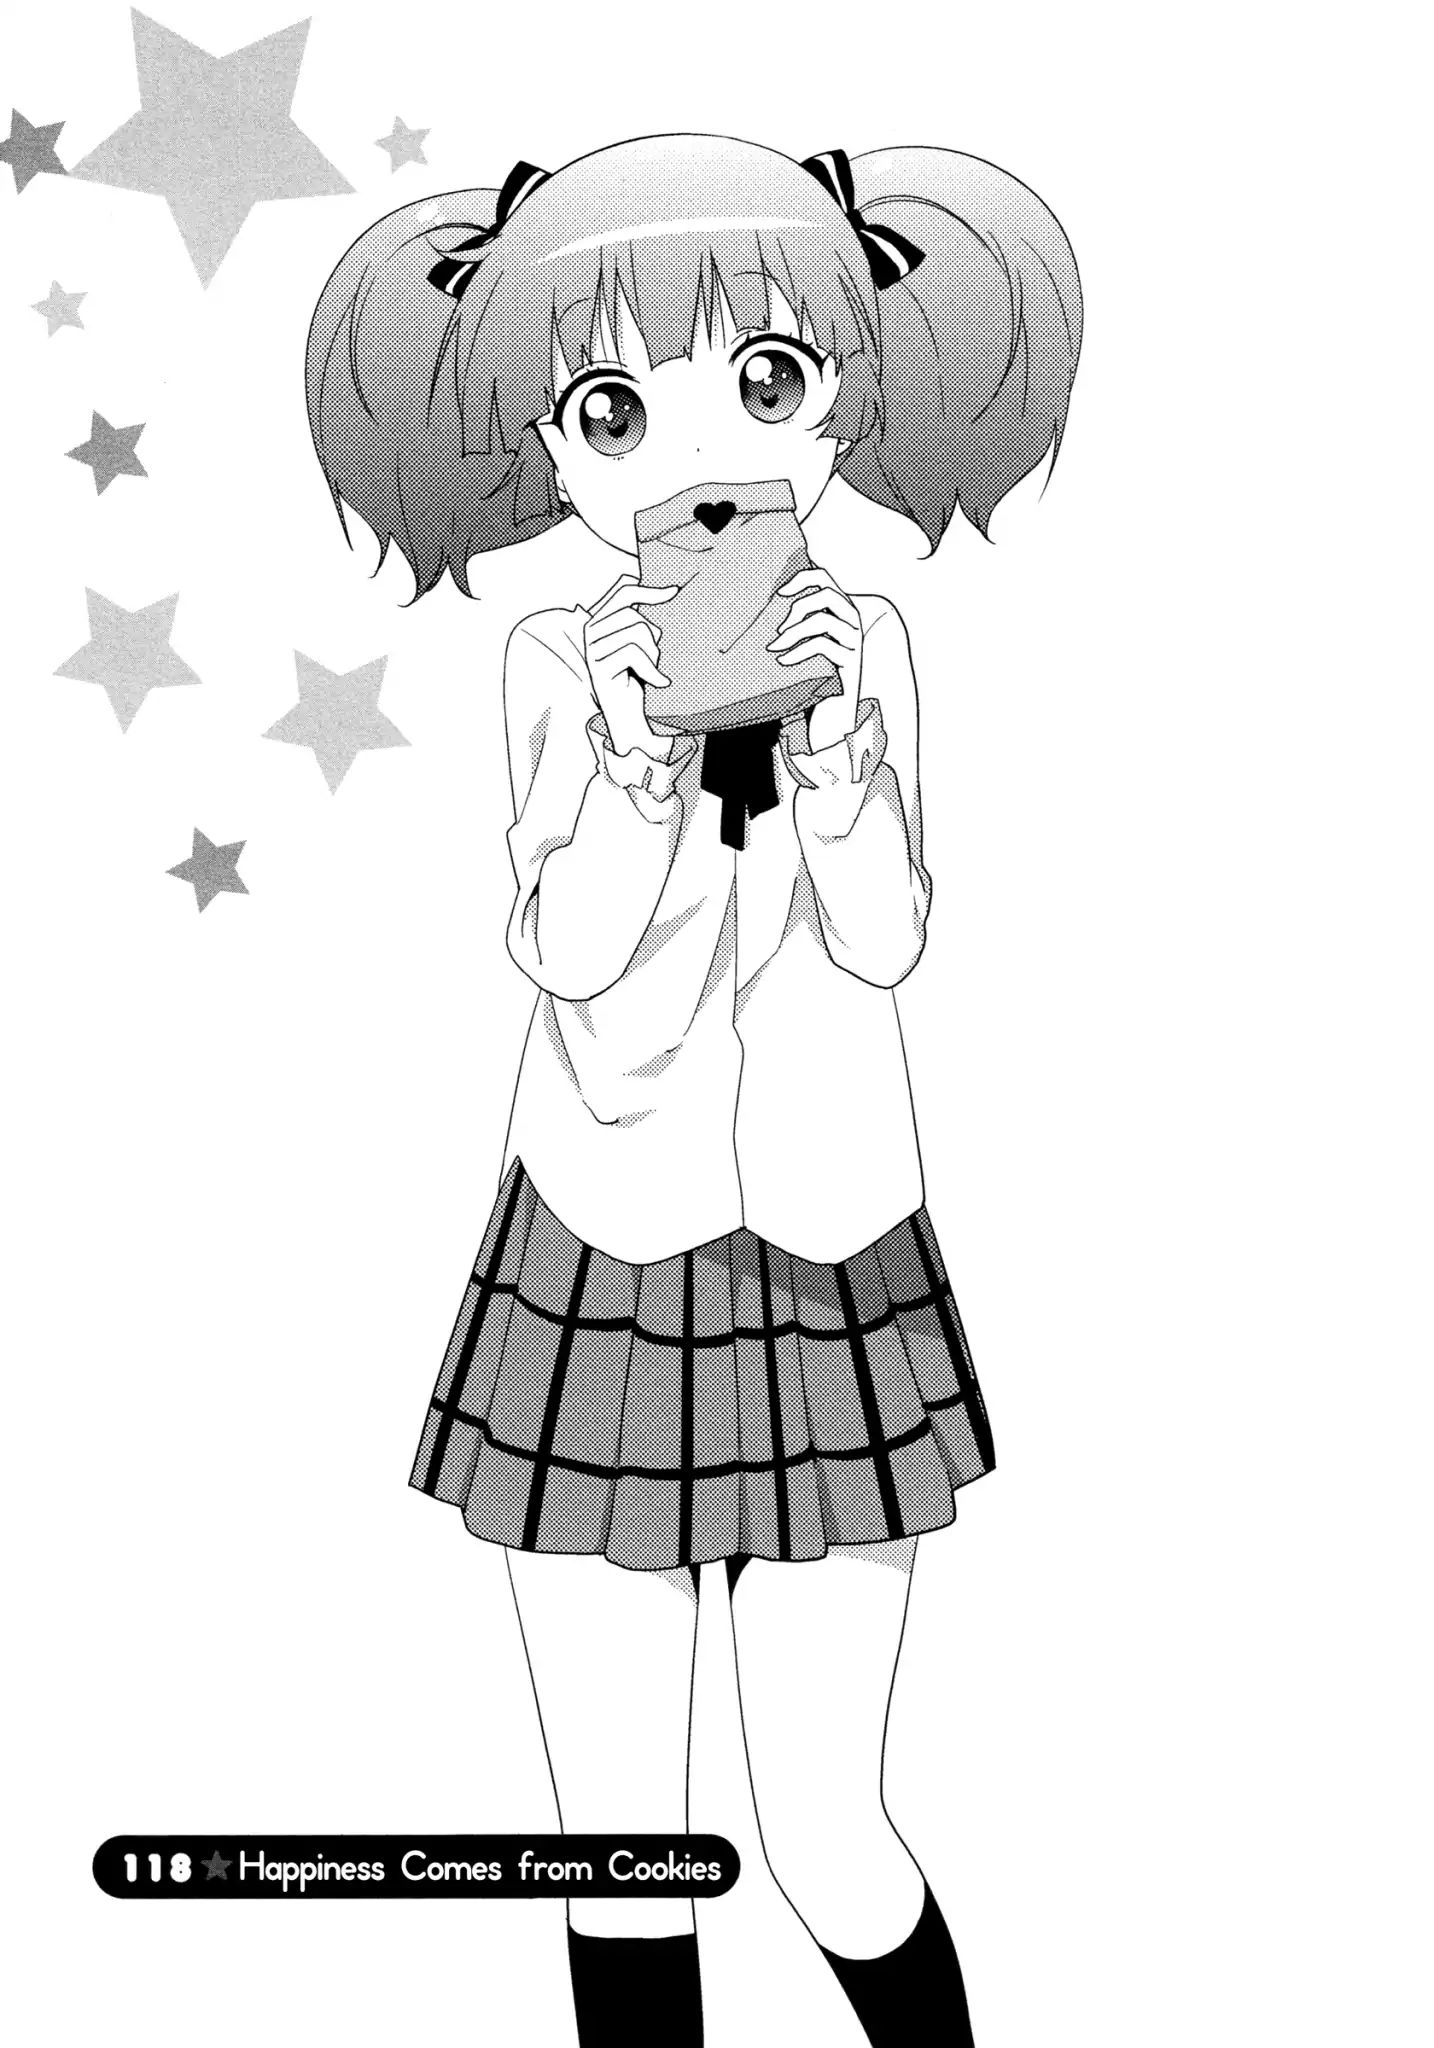 Yuru Yuri Vol.15 Chapter 118: Happiness Comes From Cookies - Picture 1